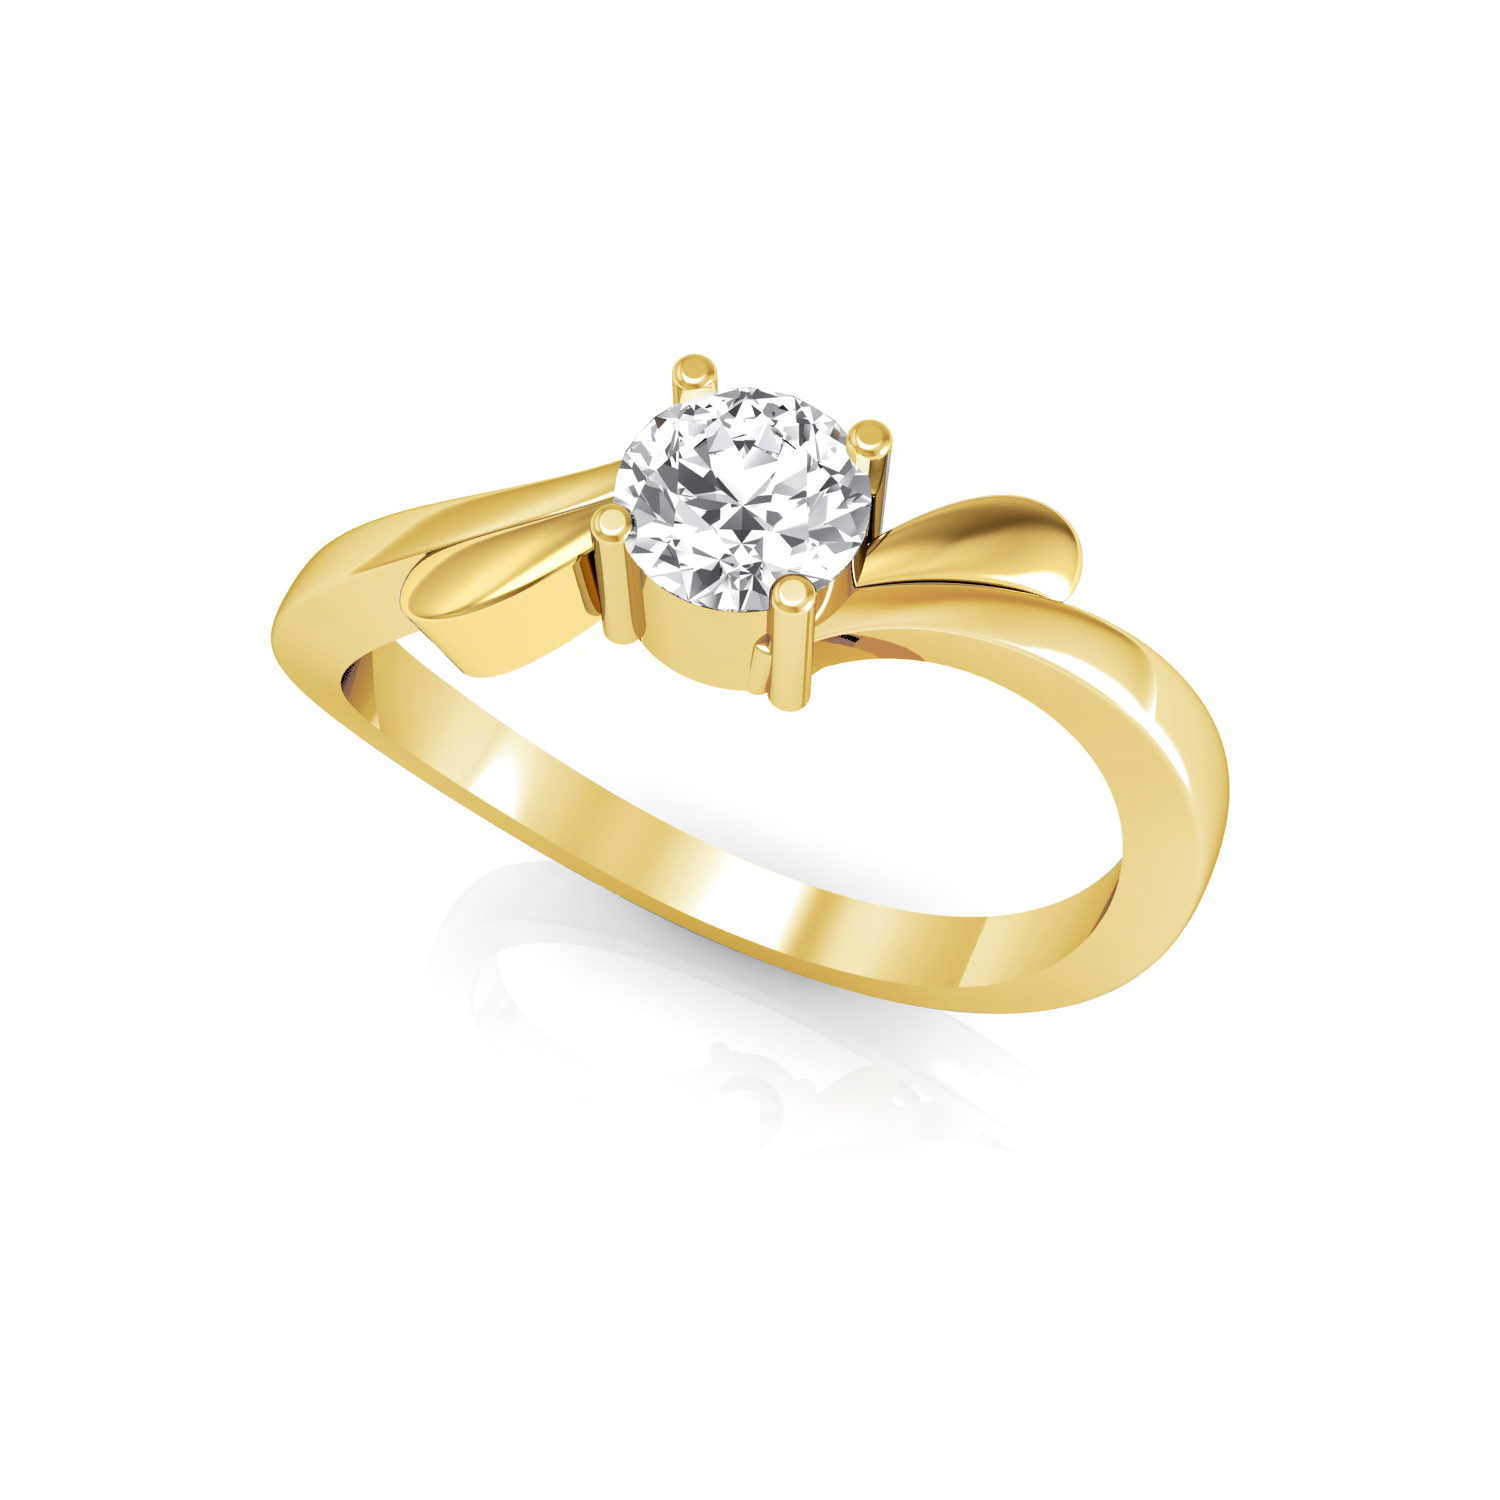 Real Diamond Solid Gold Wedding Ring